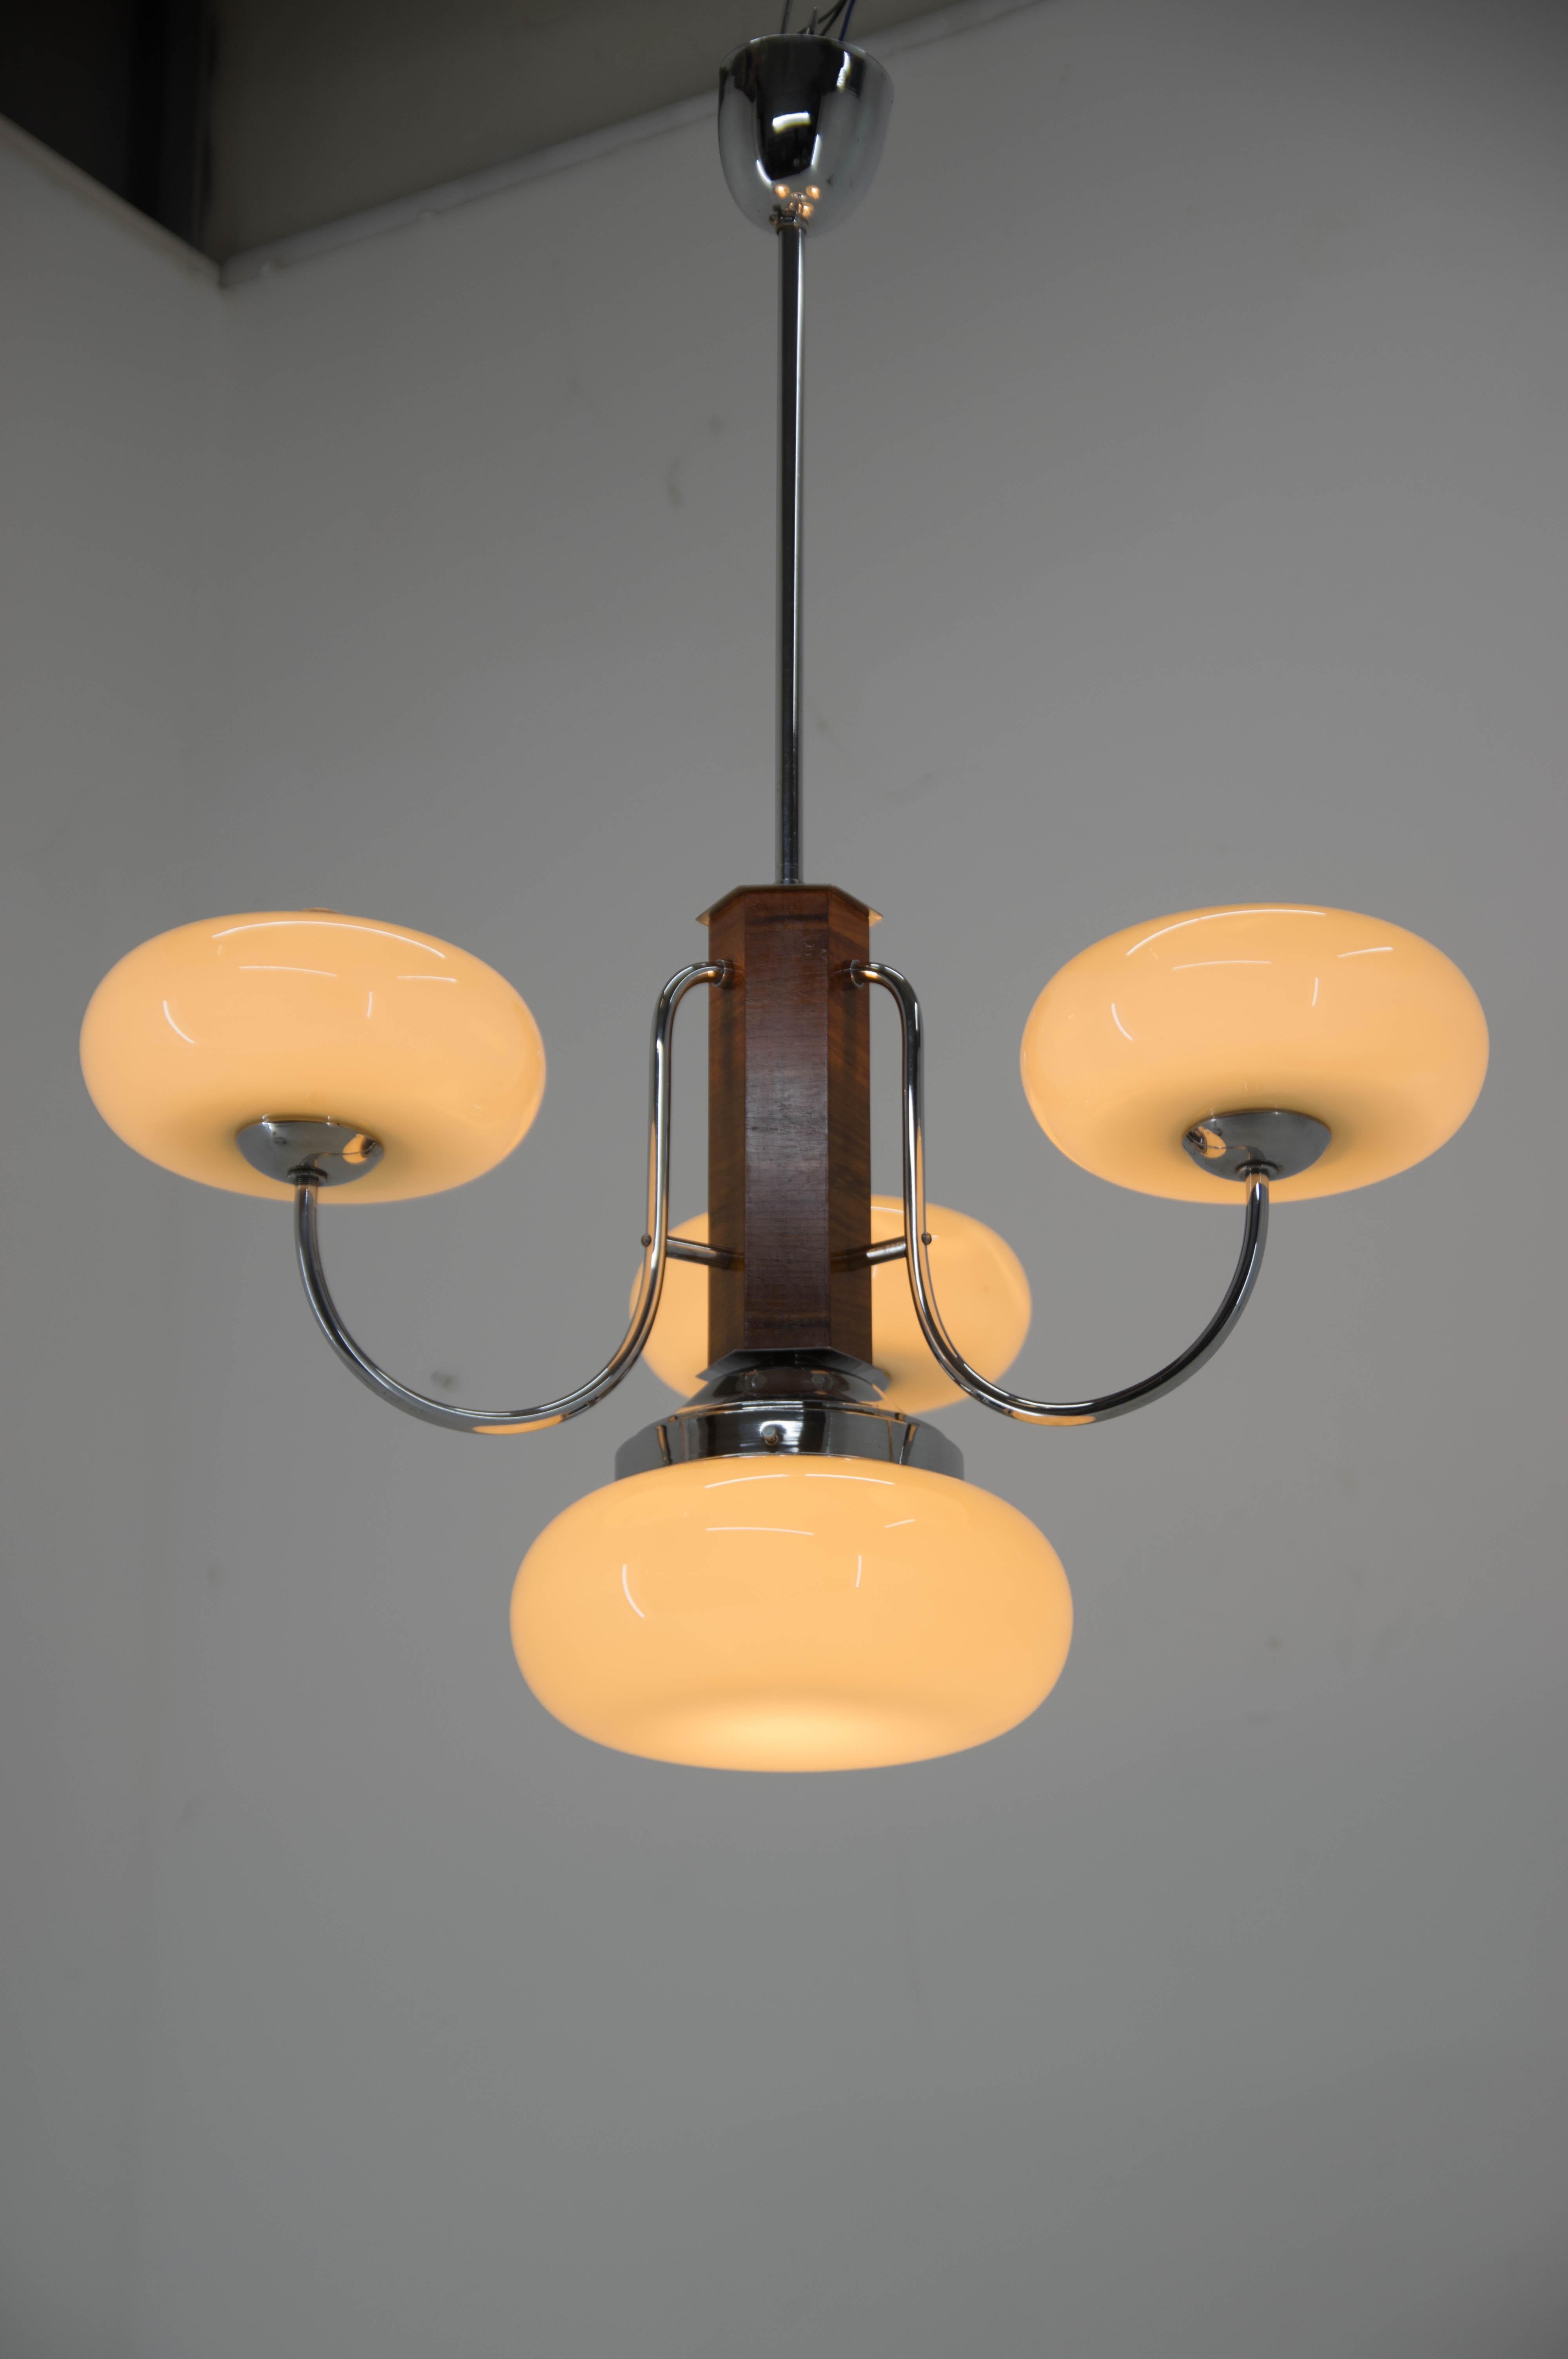 Czech Art Deco Chandelier in Perfect Condition, 1930s